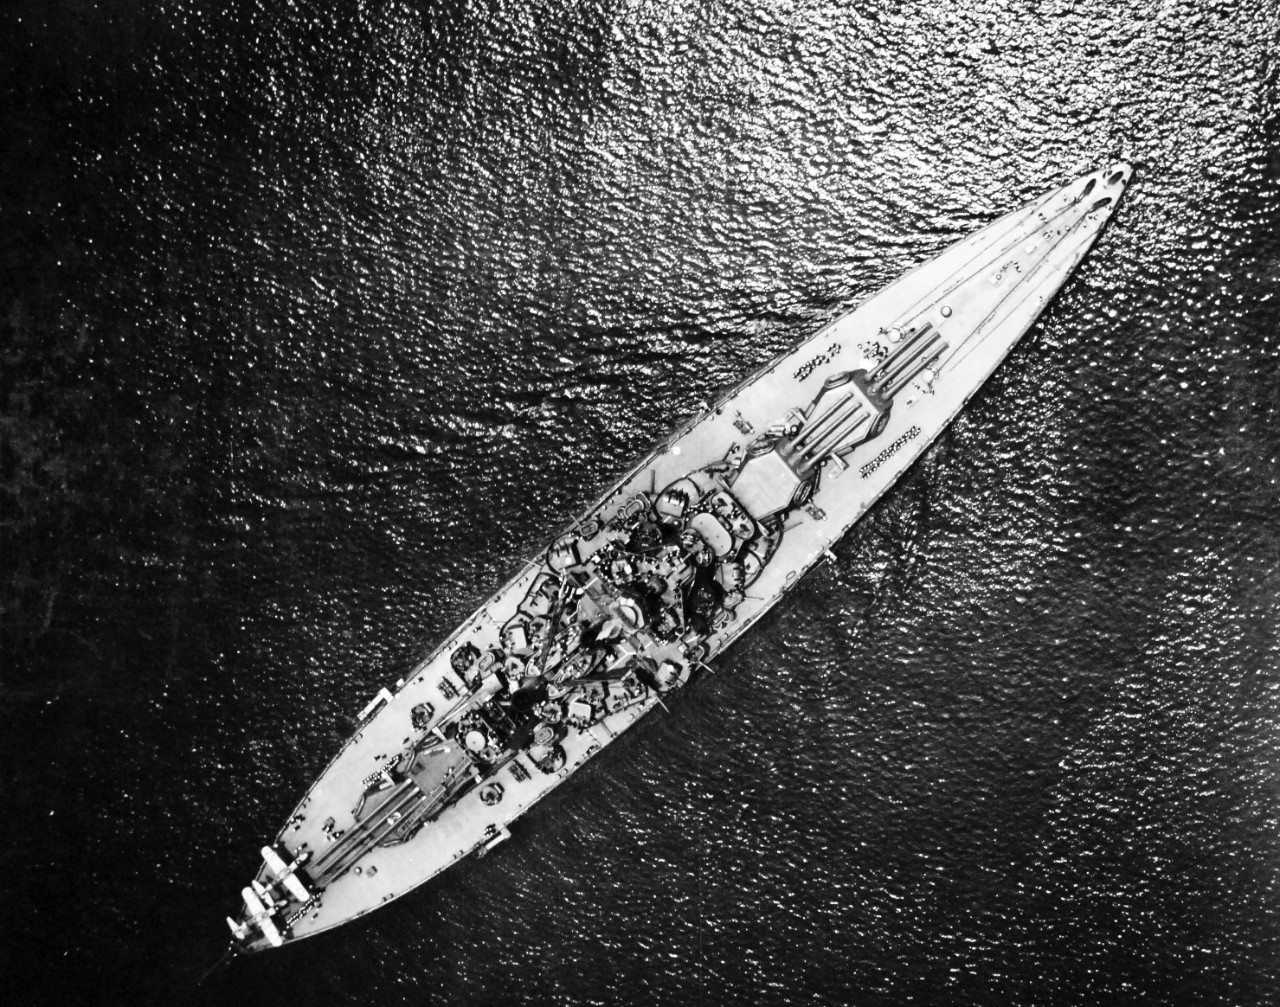 80-G-13014: USS Tennessee (BB-43), pre-WWII.   Direct overhead view, while entering San Pedro Harbor.  Photograph received June 1942.  Official U.S. Navy Photograph, now in the collections of the National Archives.    (2015/9/29).